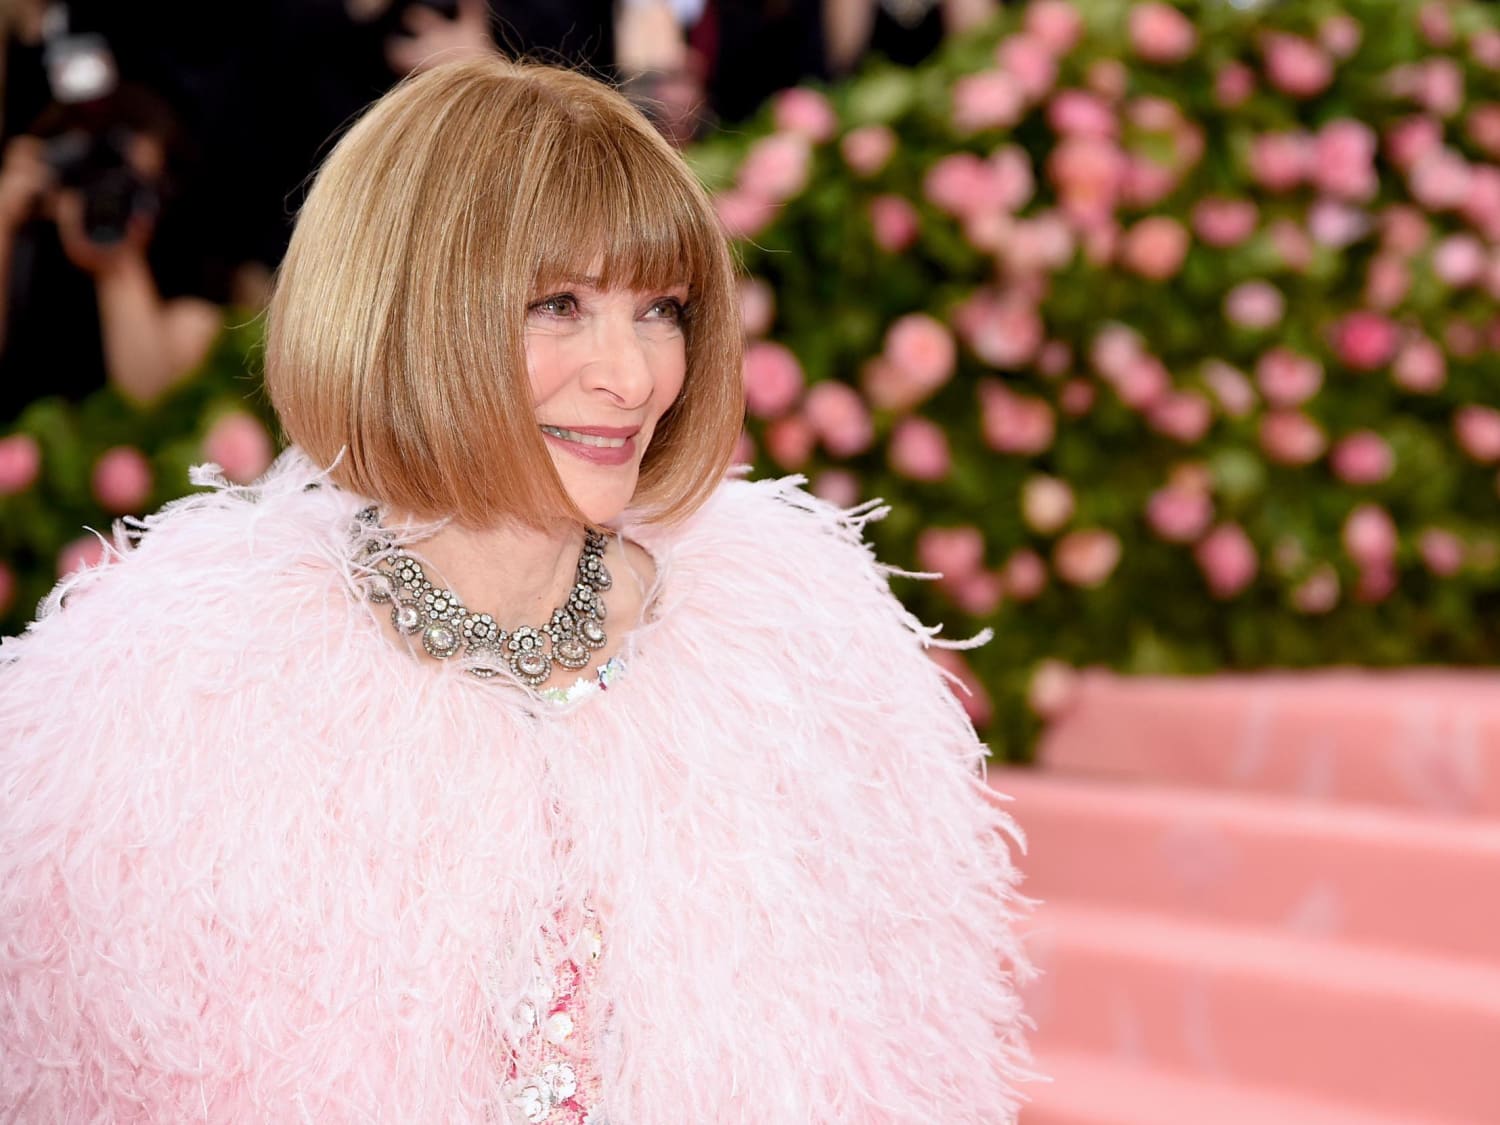 Anna Wintour creates relief fund for people in the fashion world affected by coronavirus